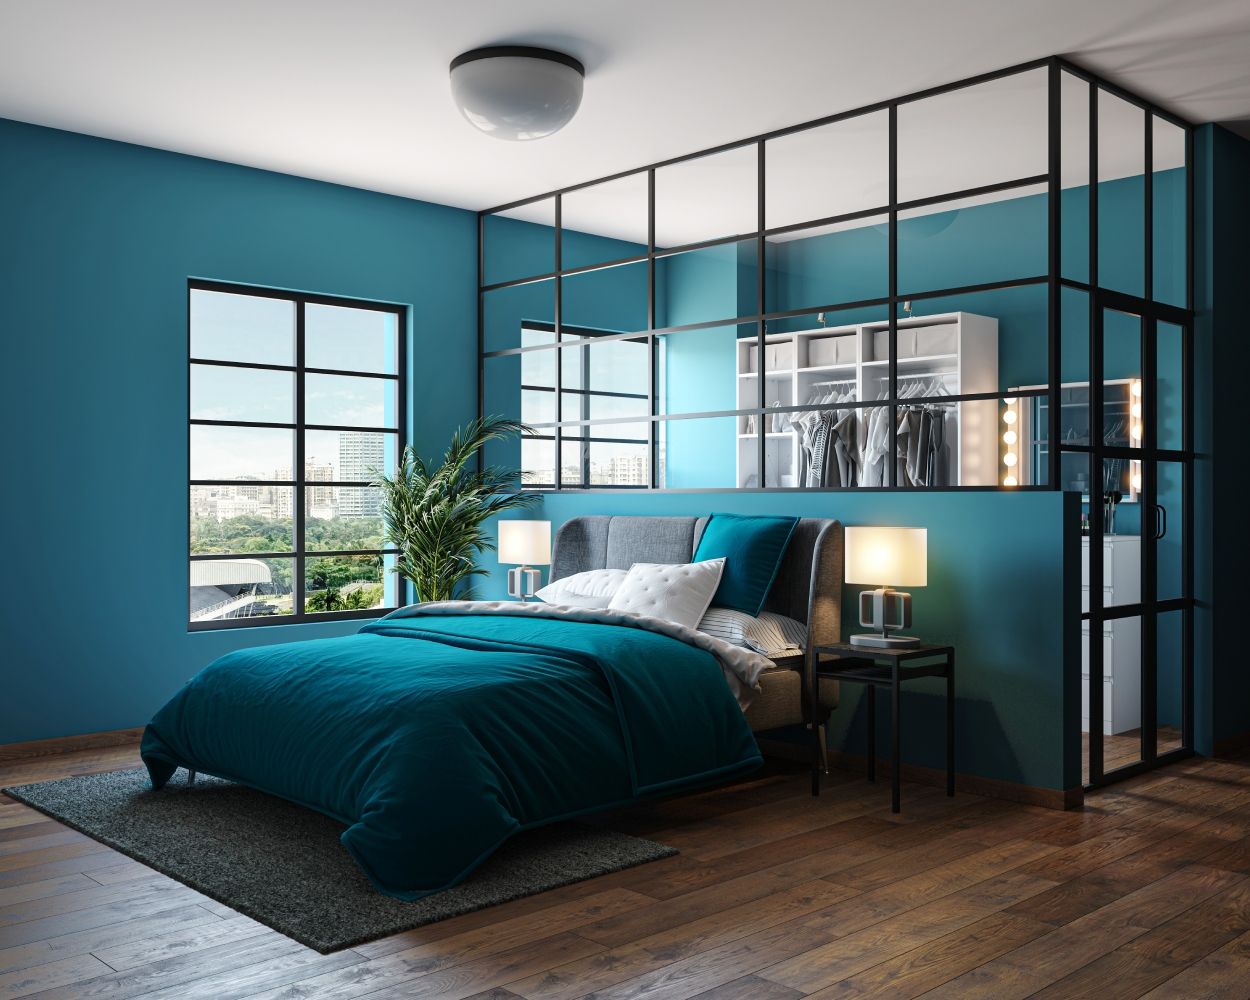 Modern Bedroom Design With A Teal Upholstered Bed And Side Tables With Lamps